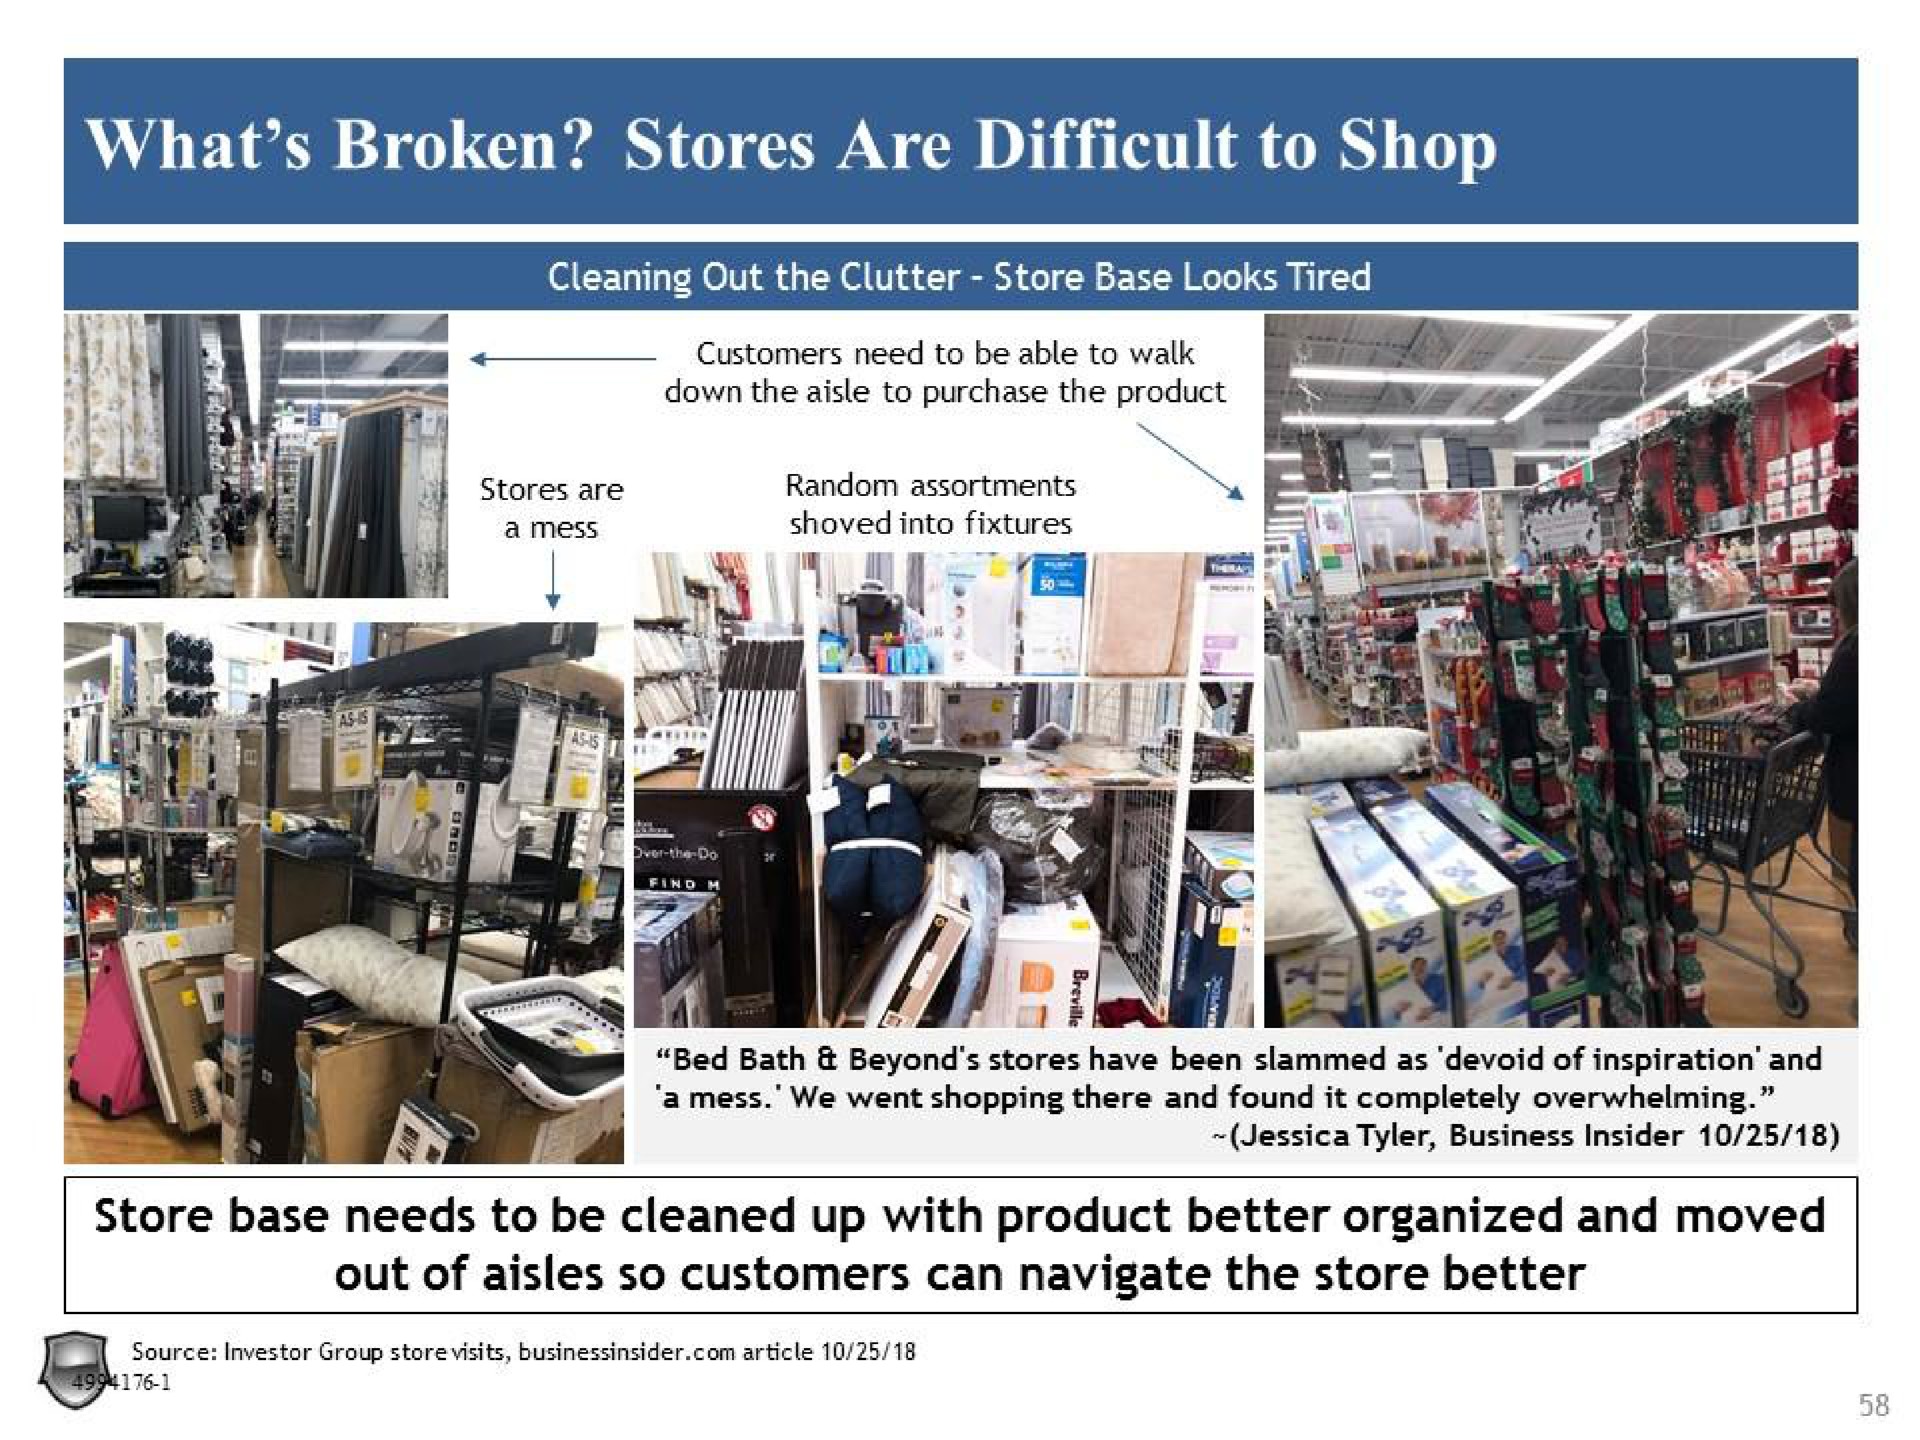 what broken stores are difficult to shop store base needs to be cleaned up with product better organized and moved out of aisles so customers can navigate the store better | Legion Partners